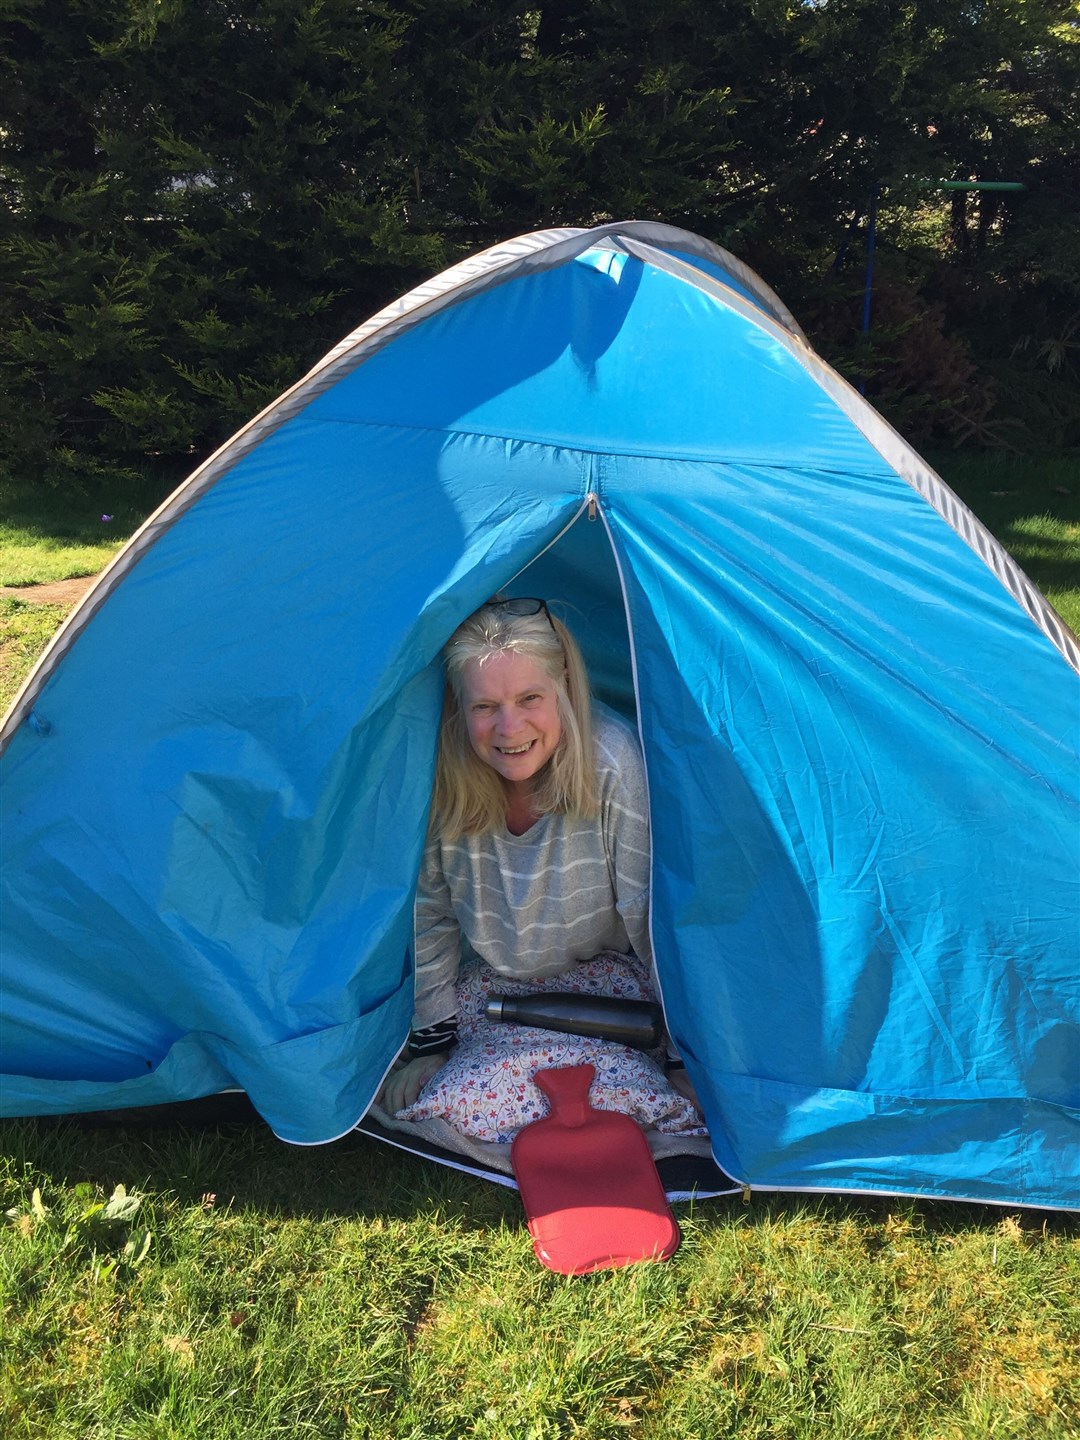 Rona Matheson has been camping in her back garden to raise money for the Haven Appeal.